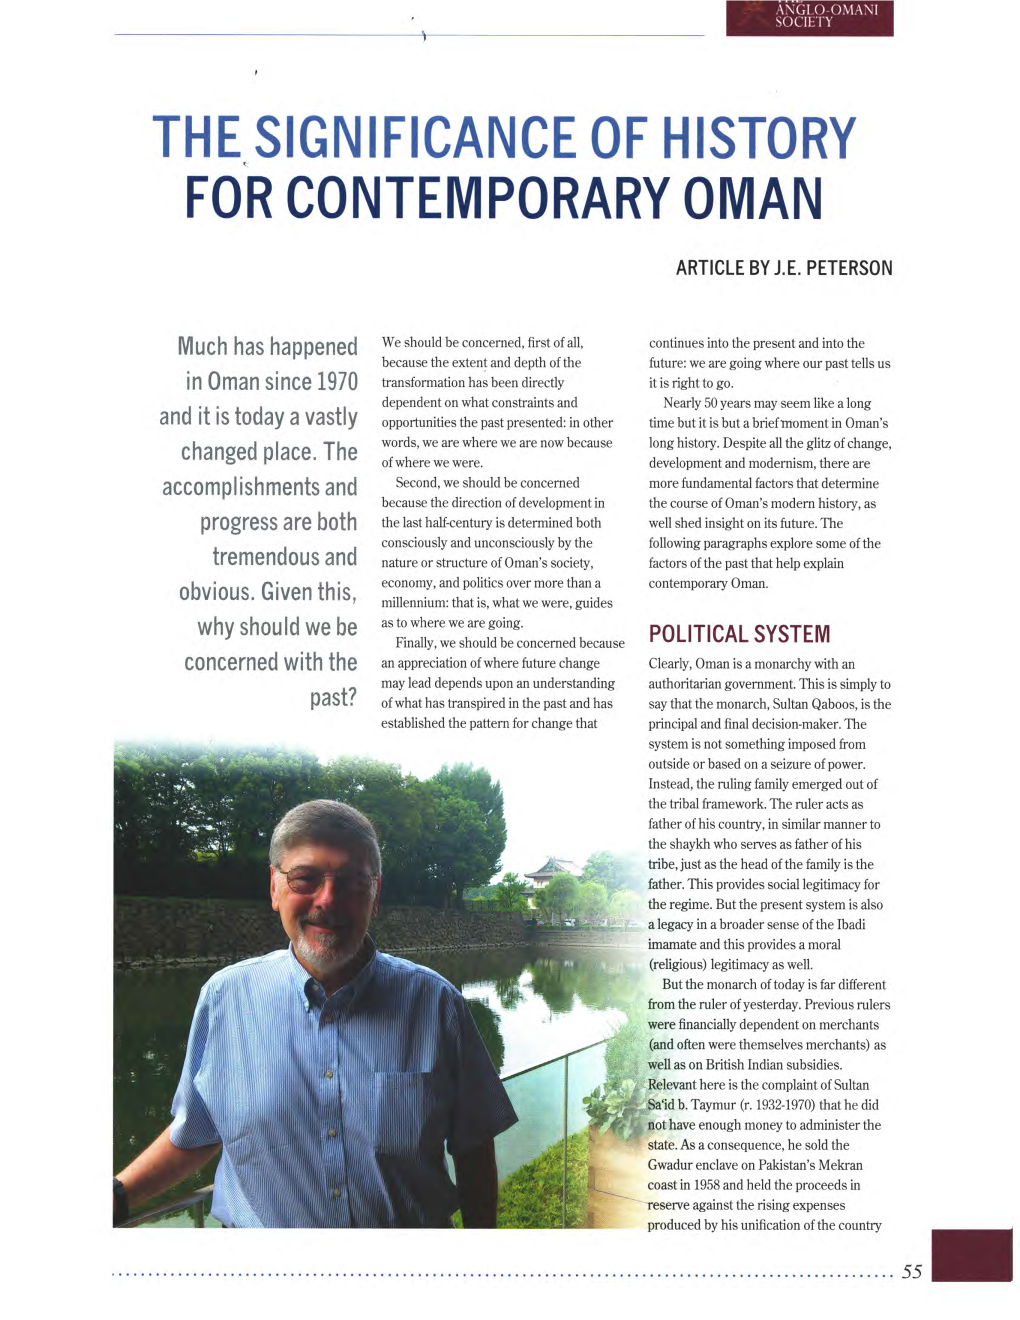 The Significance of History for Contemporary Oman